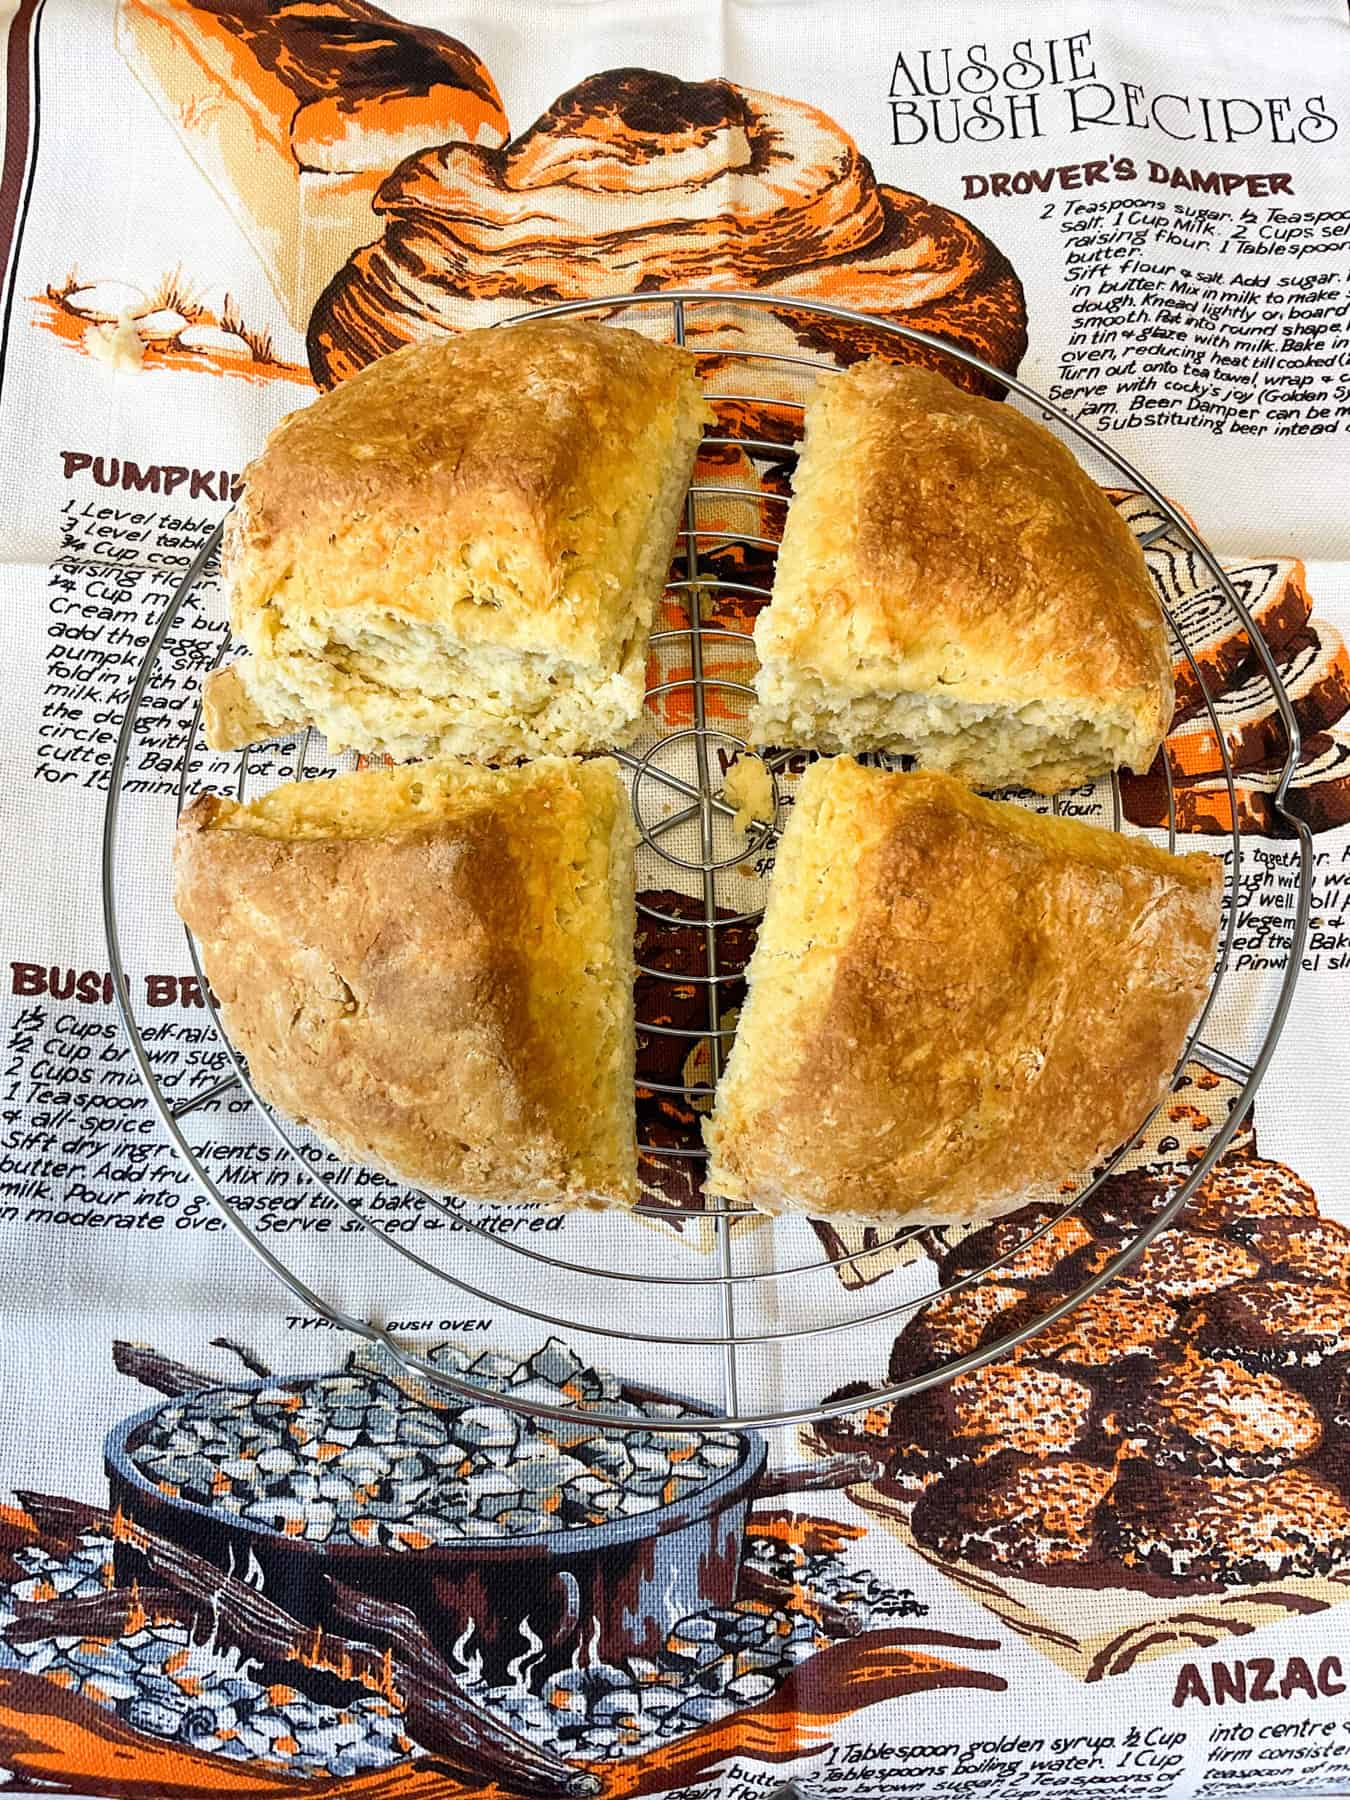 Damper bread that has been pulled apart into 4 triangles with an Australian recipe tea towel in background.